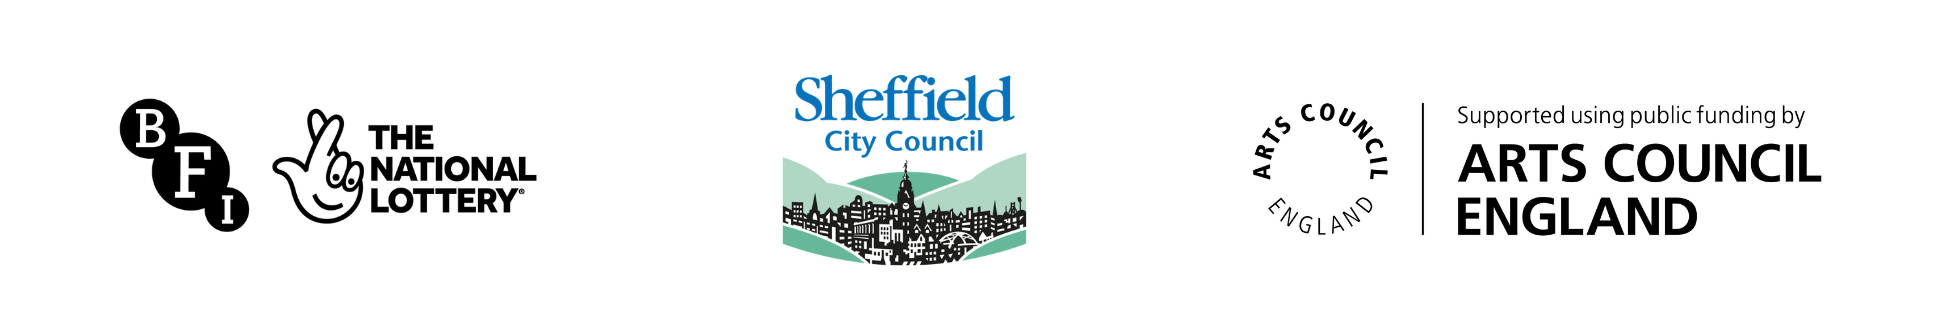 The British Film Institute and National Lottery logo, the Sheffield City Council logo, the Arts Council England logo